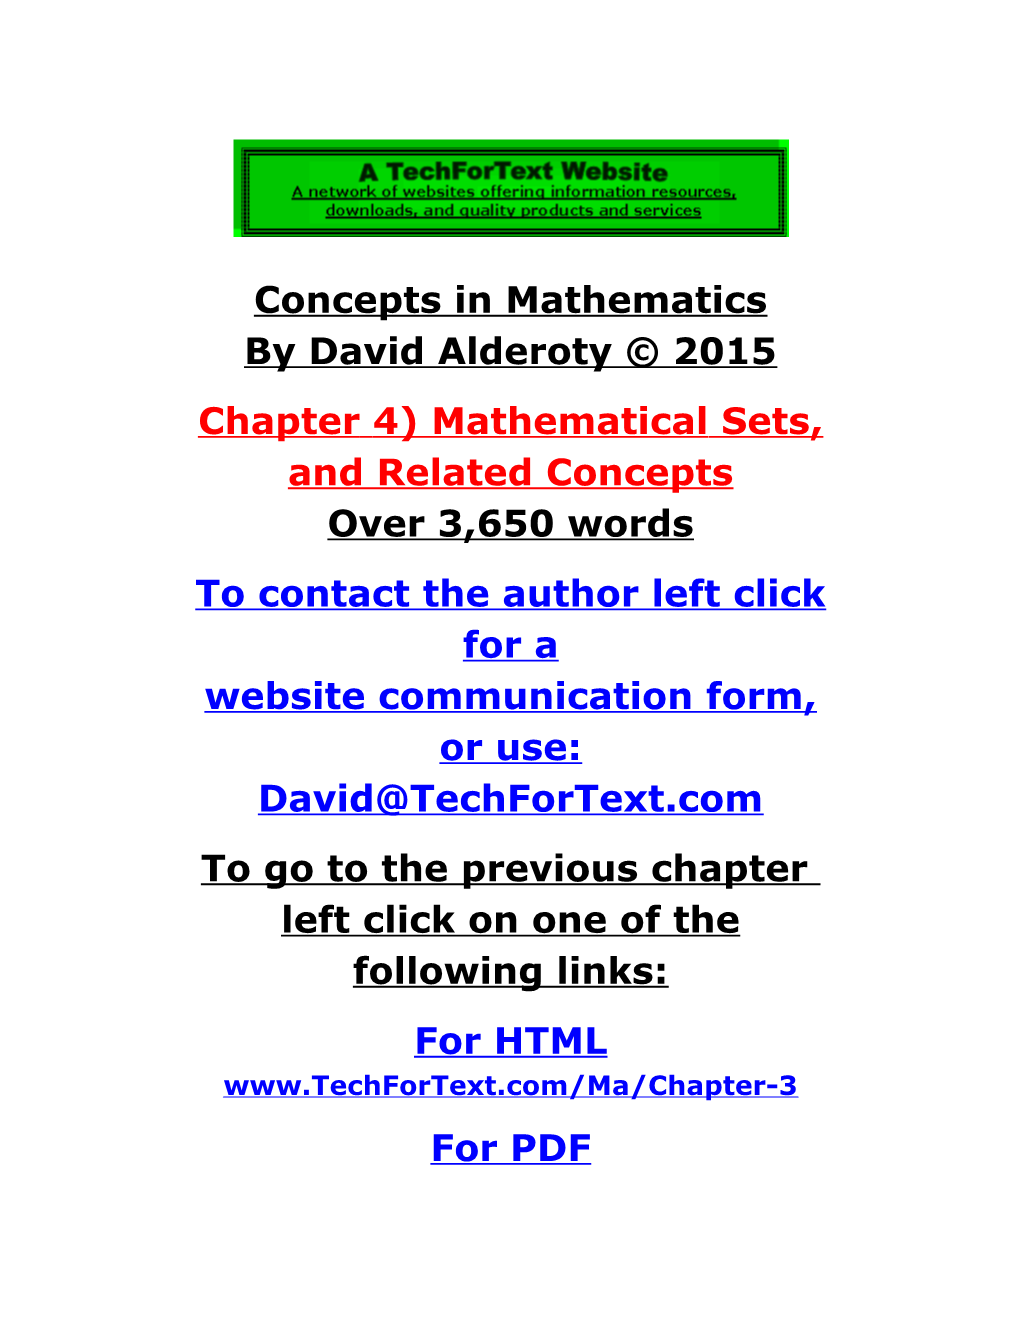 Mathematical Sets and Related Concepts